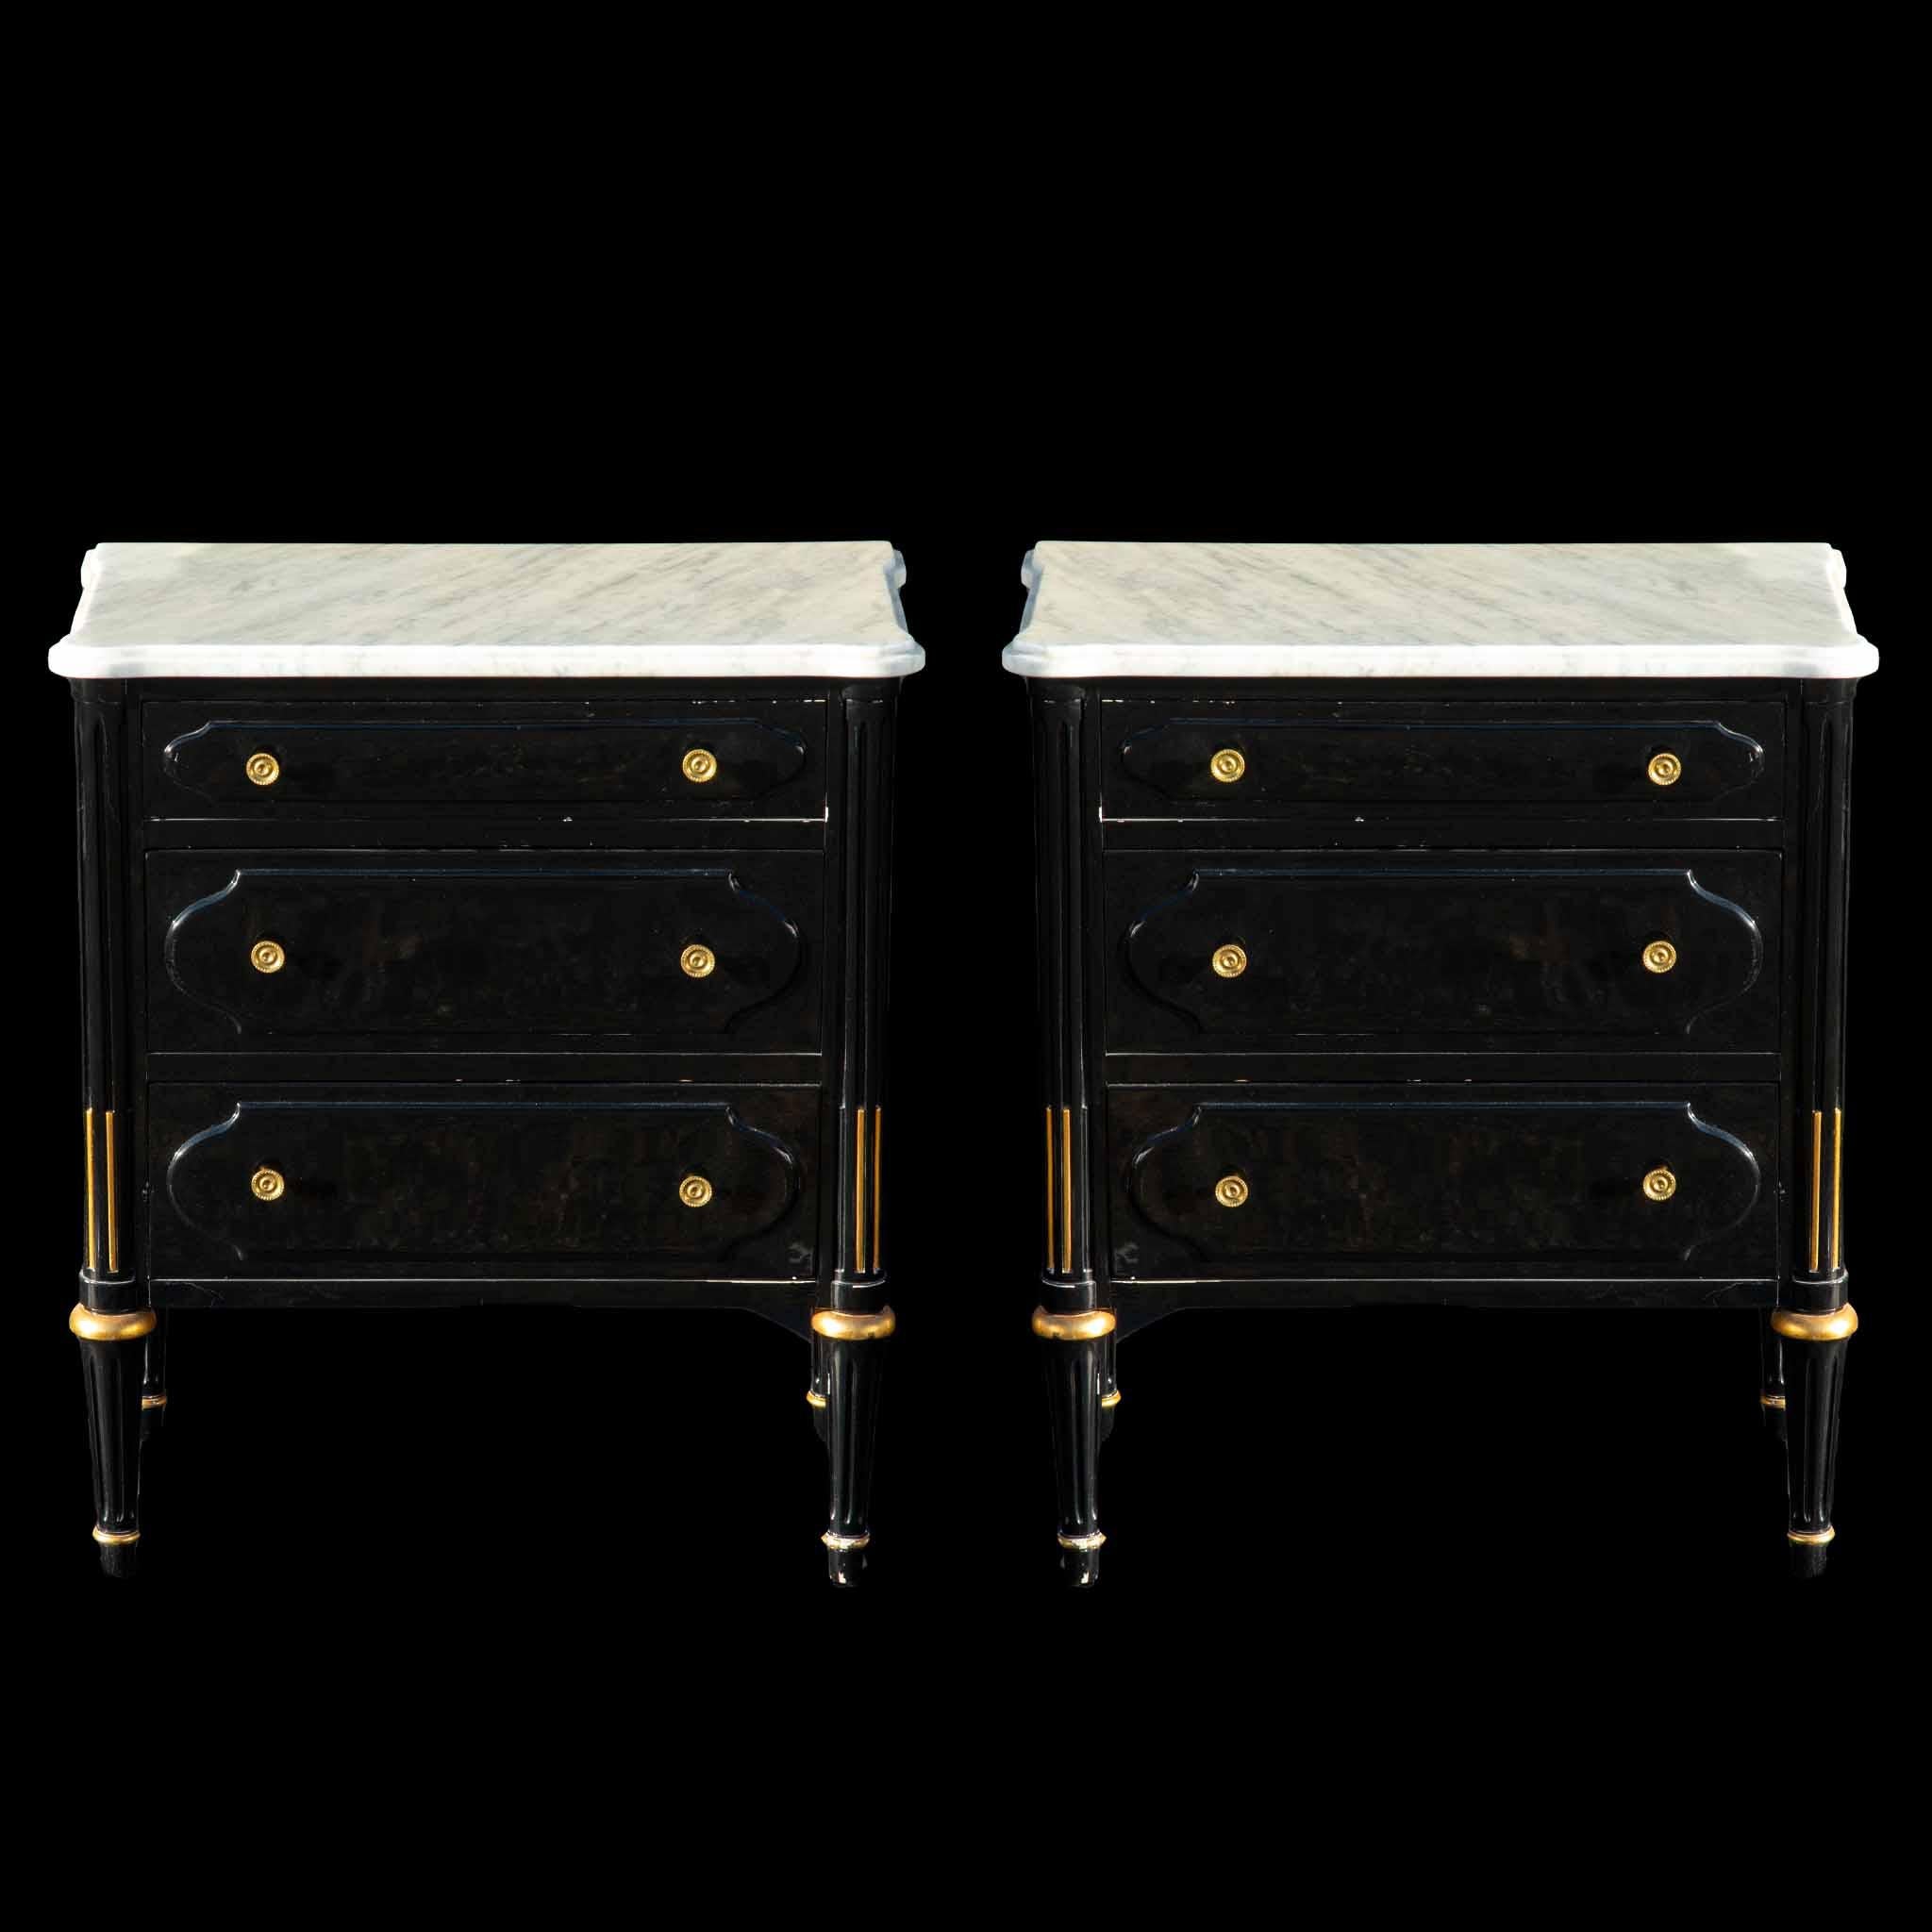 Exquisite pair of small dressers featuring a sleek black lacquer finish, elegant brass accents, and luxurious white marble tops. These versatile pieces not only serve as stylish storage solutions but also double as perfect bedside tables. Elevate